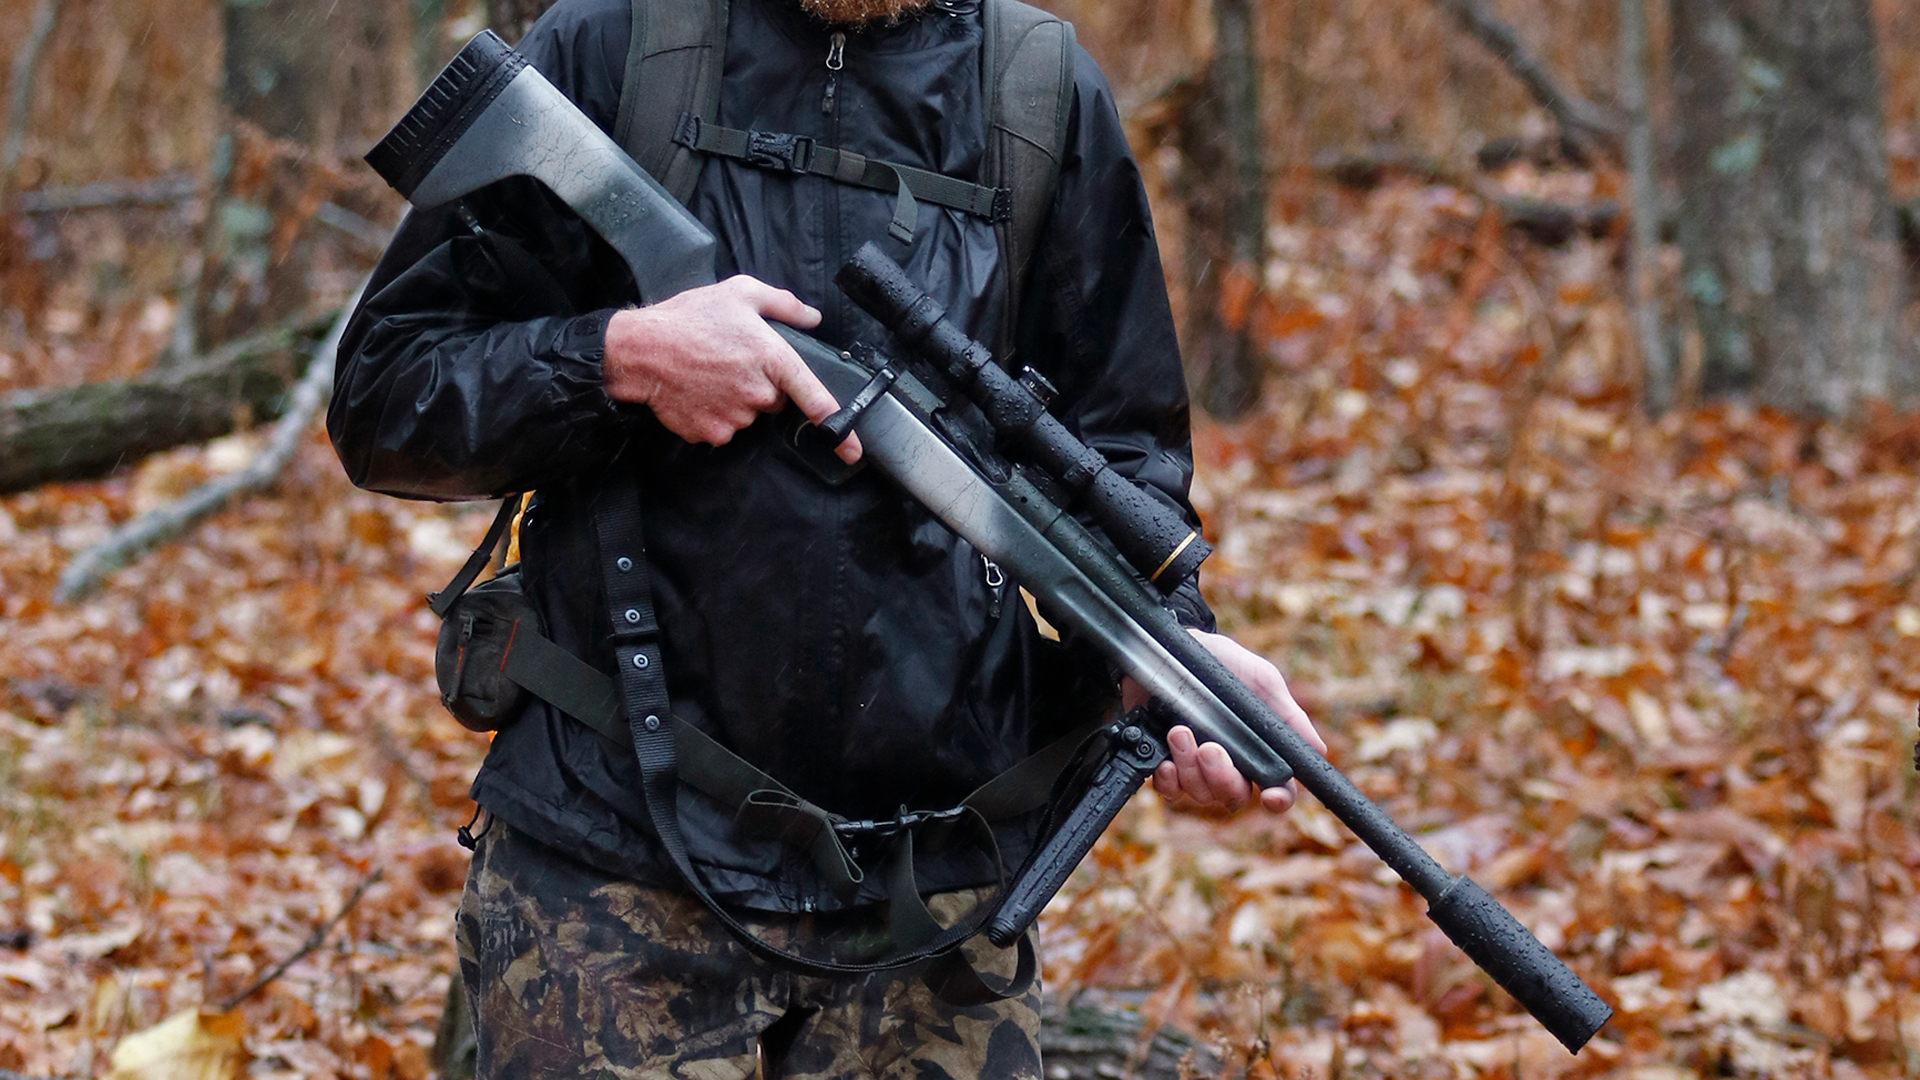 Hunter with Springfield Armory Redline bolt-action hunting rifle held across the body two hands holding rifle pointed at ground with silencer central suppressor leupold riflescope raining wet woods finger off trigger bipod deployed